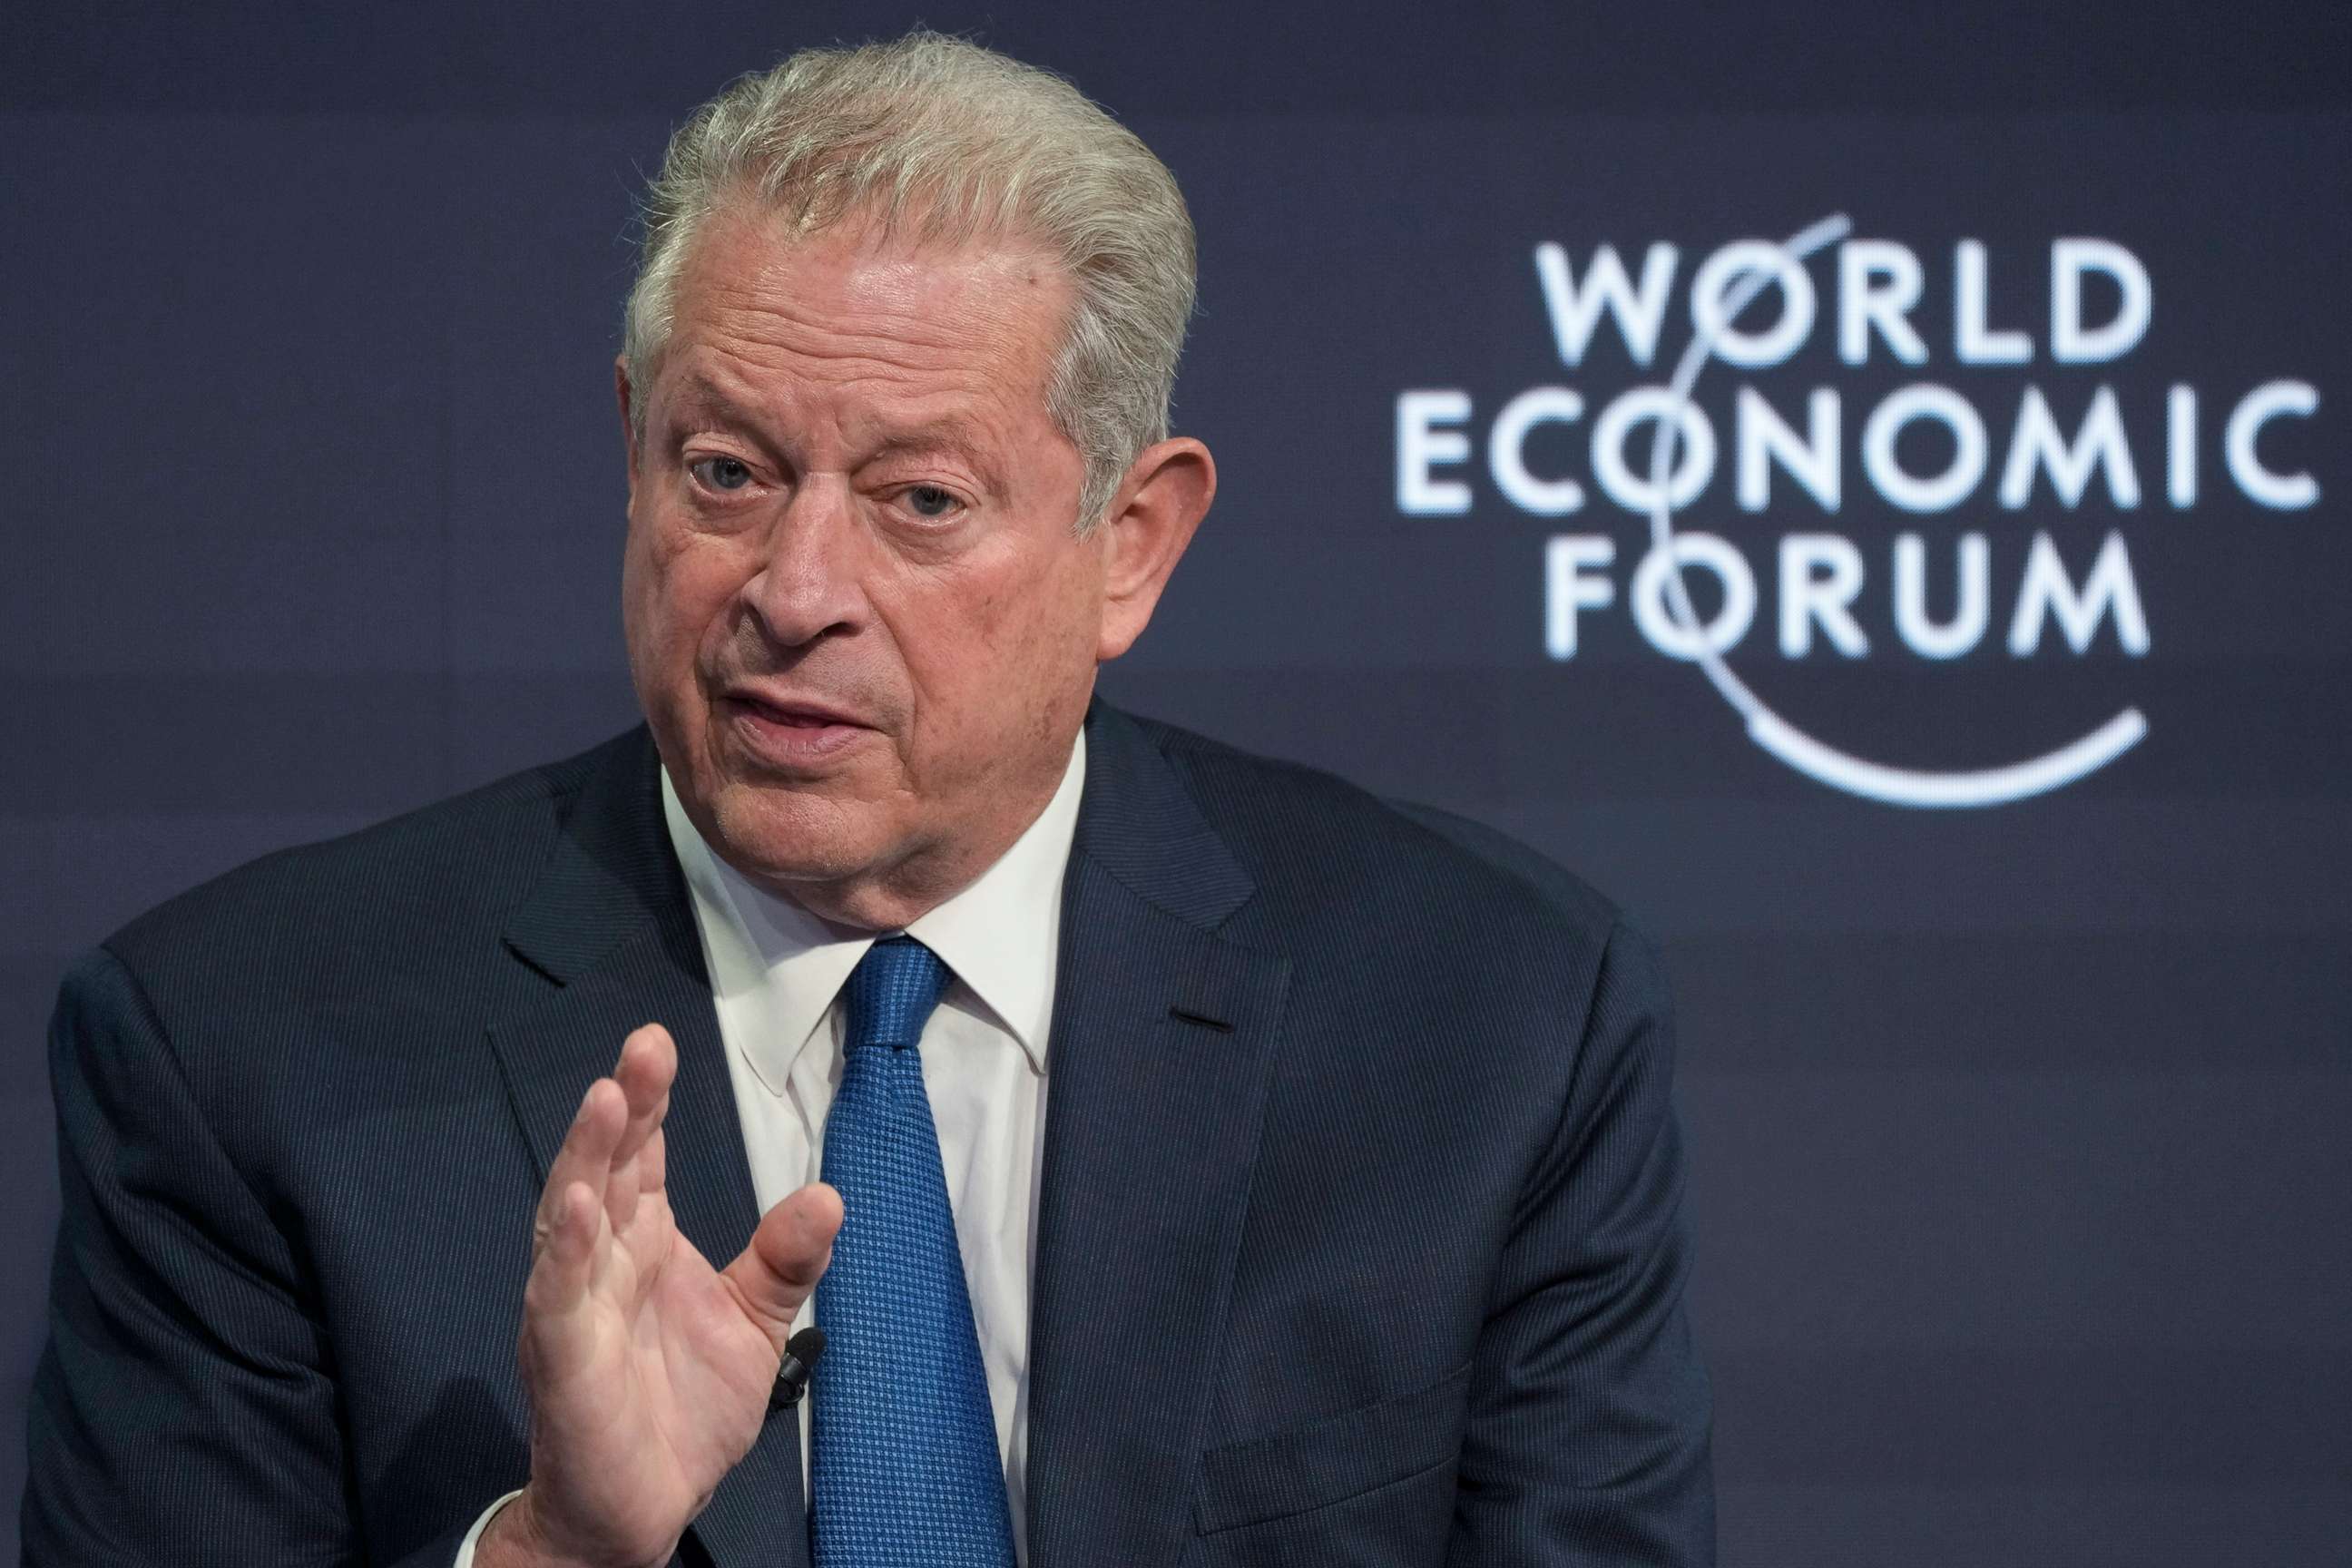 PHOTO: Al Gore speaks during a conversation at the World Economic Forum in Davos, Switzerland, May 25, 2022.